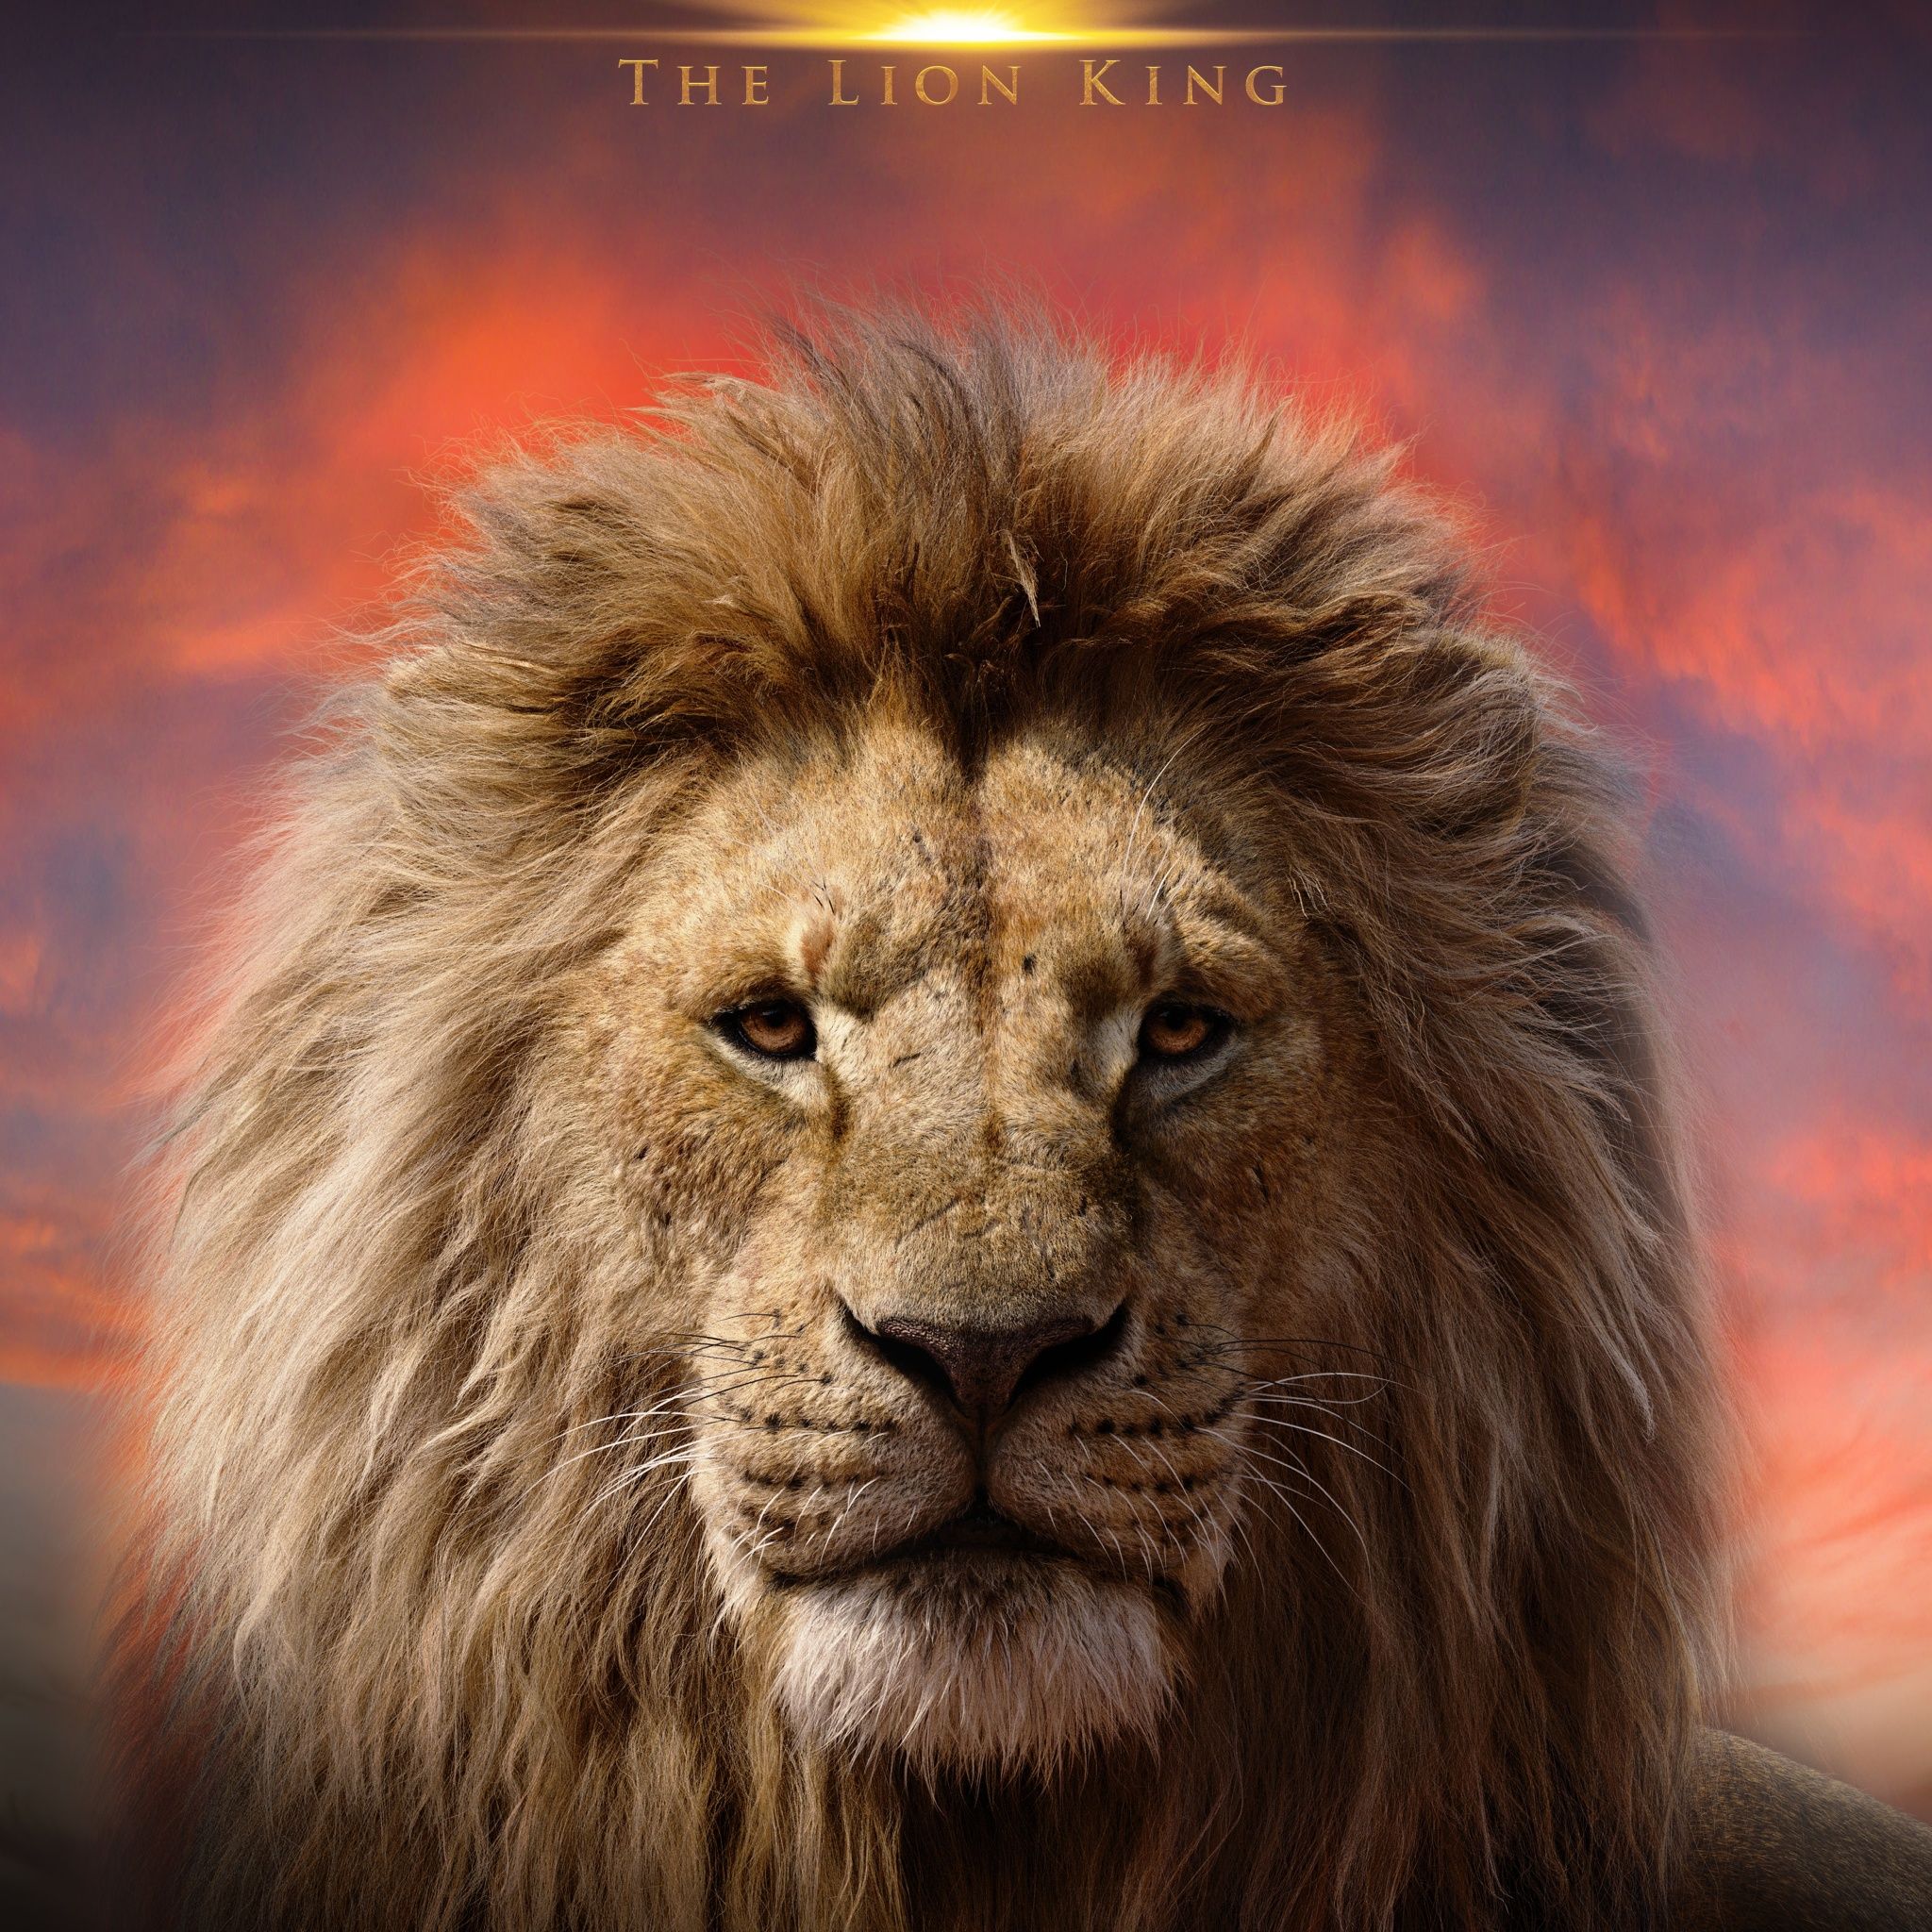 Mufasa: The Lion King 5K Wallpaper for iPhone